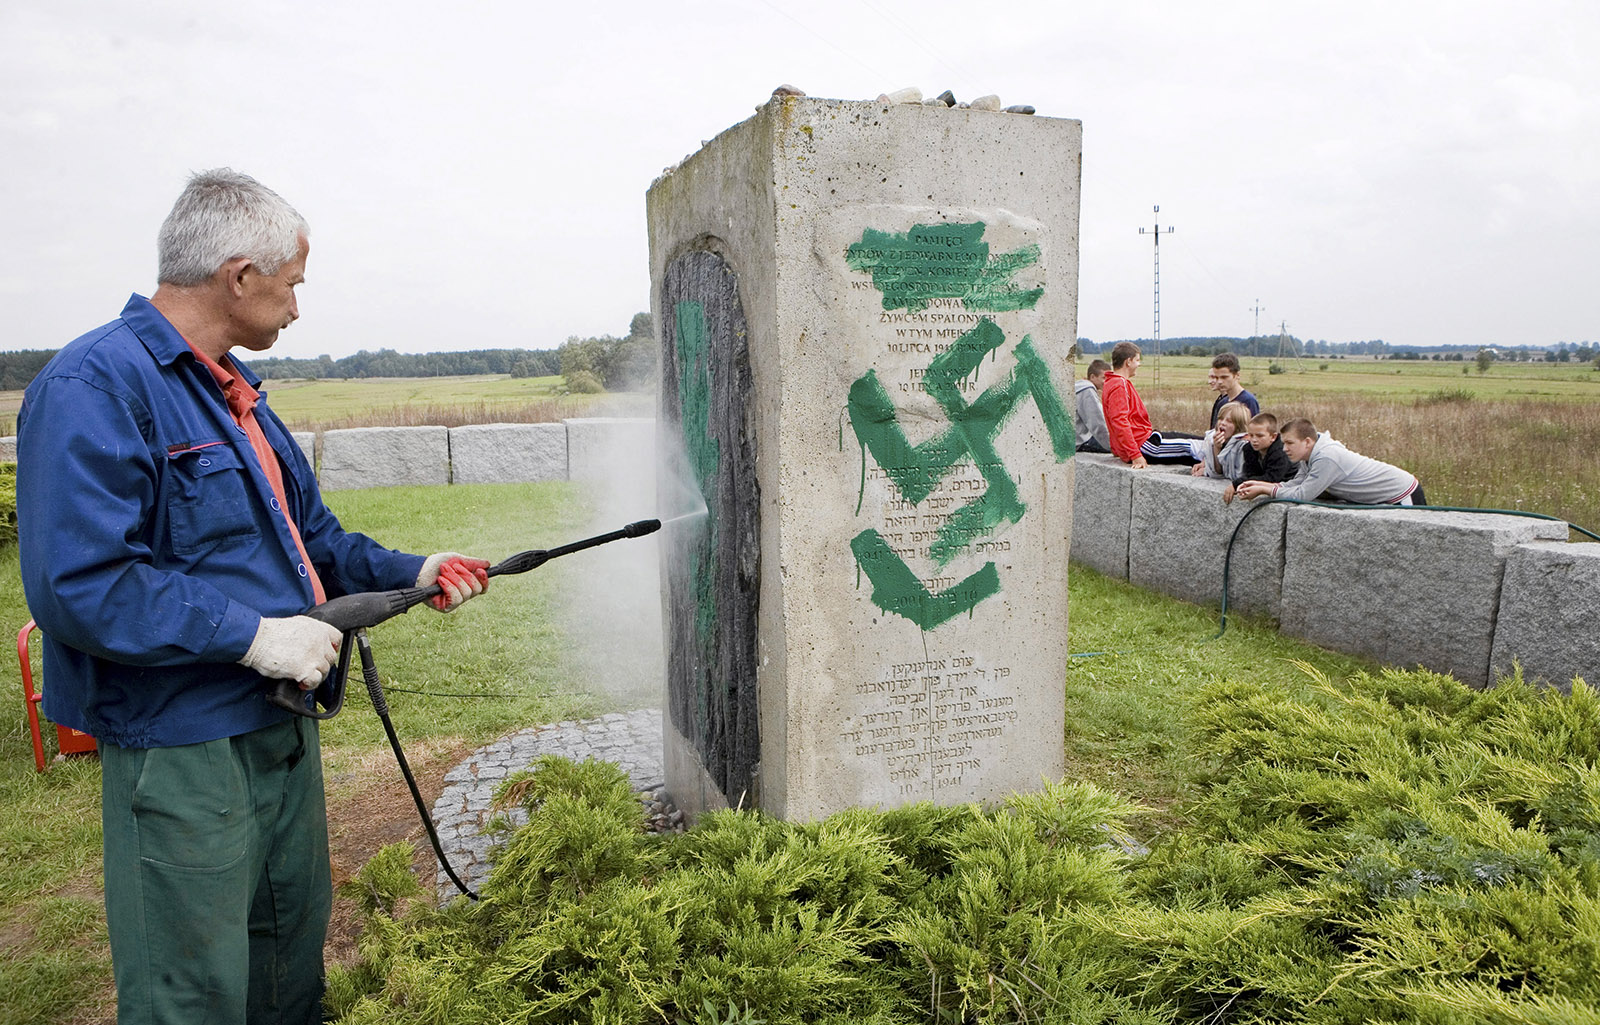 A worker cleaning a monument to the victims of the 1941 Jedwabne pogrom after it was defaced by neo-Nazis, Poland, 2011